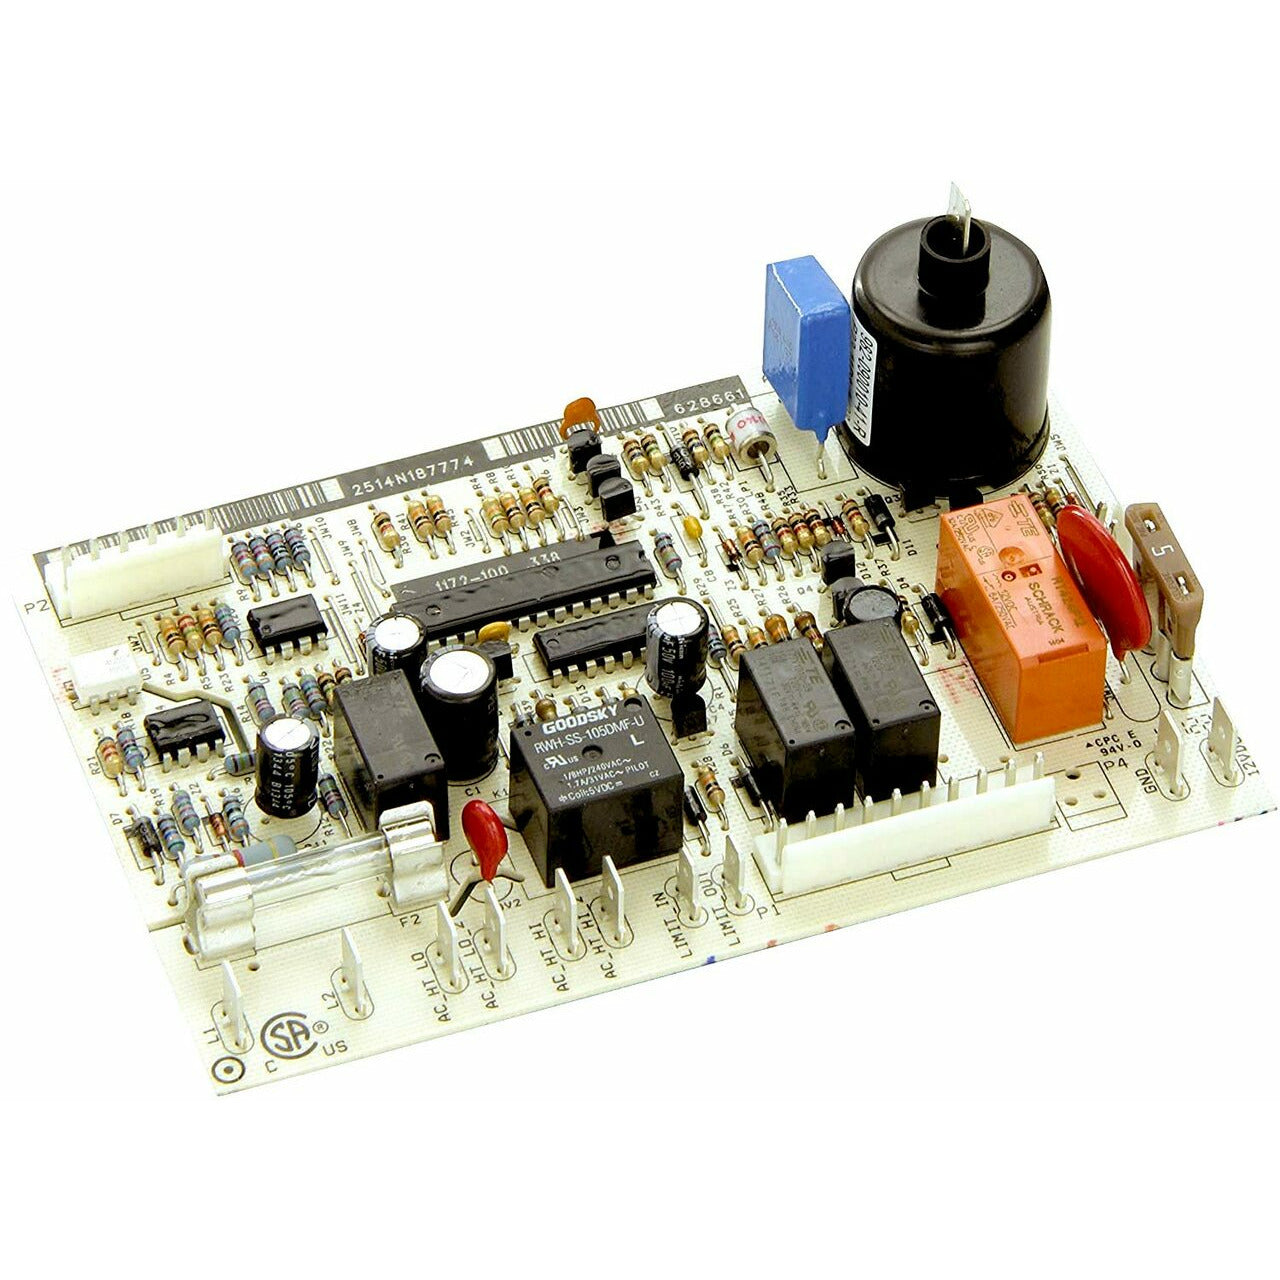 Norcold® Refrigerator Power Supply Circuit Board - 628661